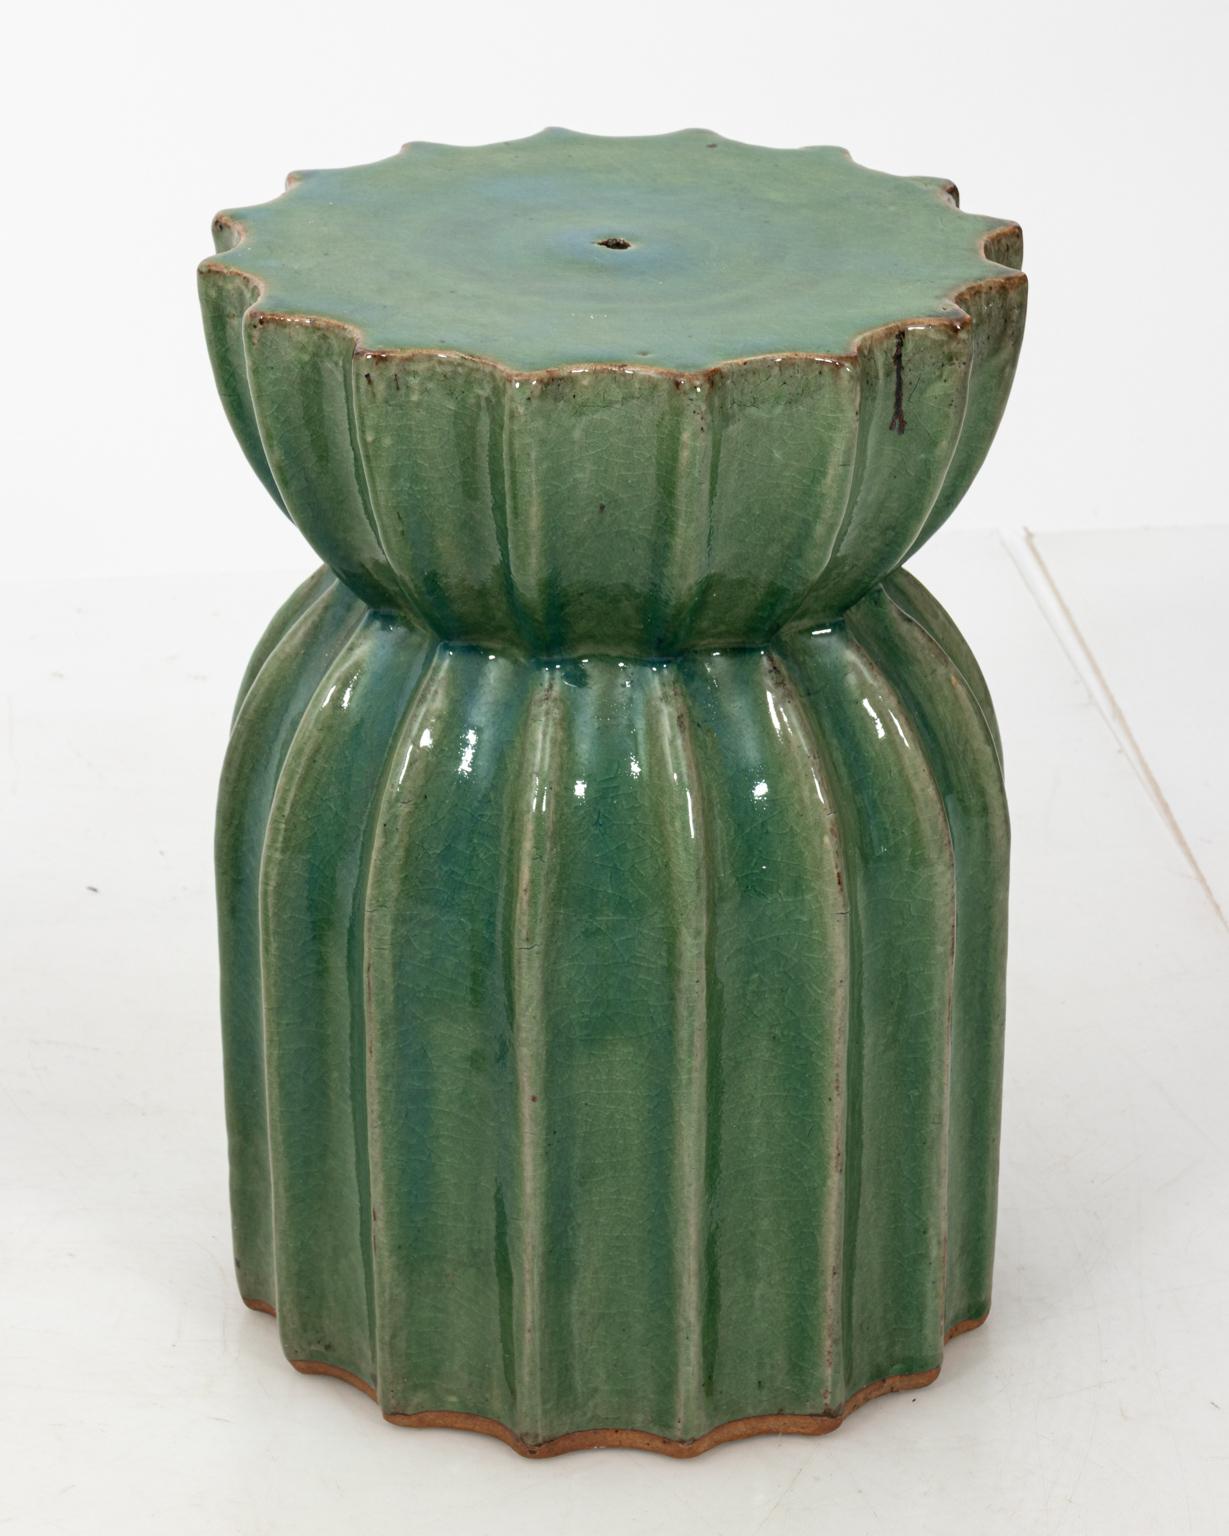 Contemporary pair of Mid-Century Modern style fluted terracotta garden stools in a soft green paint with glazed finish. Made in Asia. Please note of wear consistent with age including minor finish and paint loss along with minor crazing.